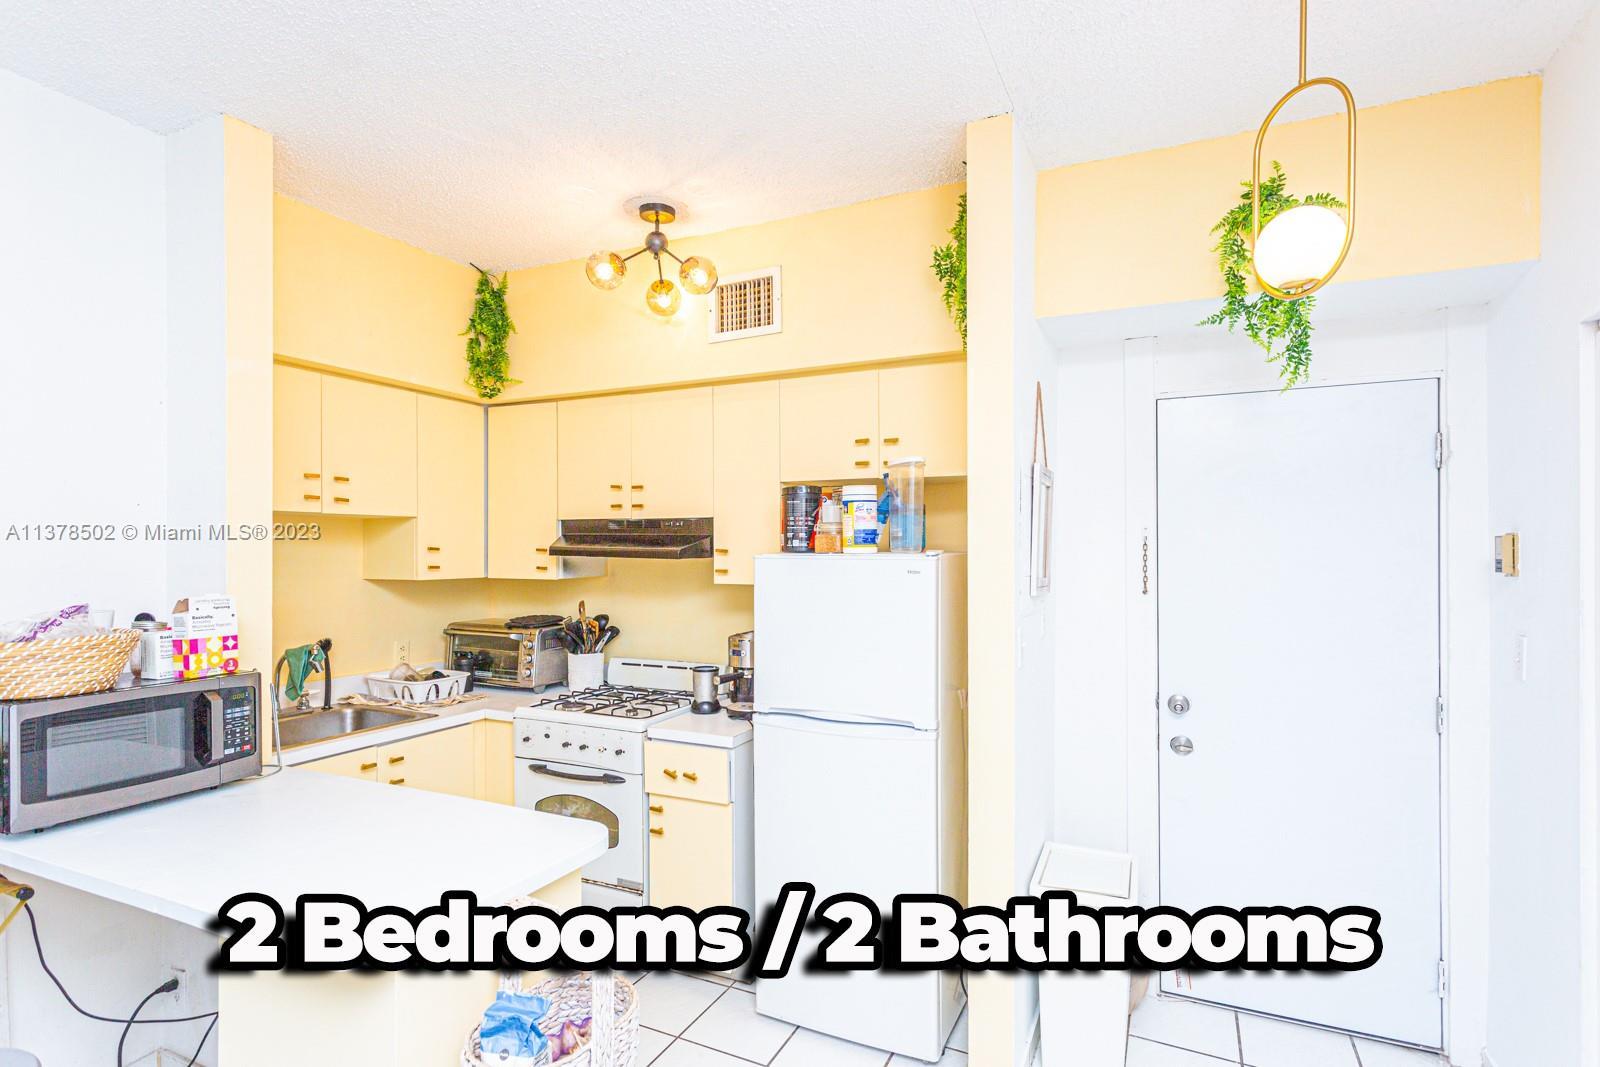 UPGRADED KITCHEN, Jun/2023! This stunning two-bedroom, two-bathroom apartment is located just few bl